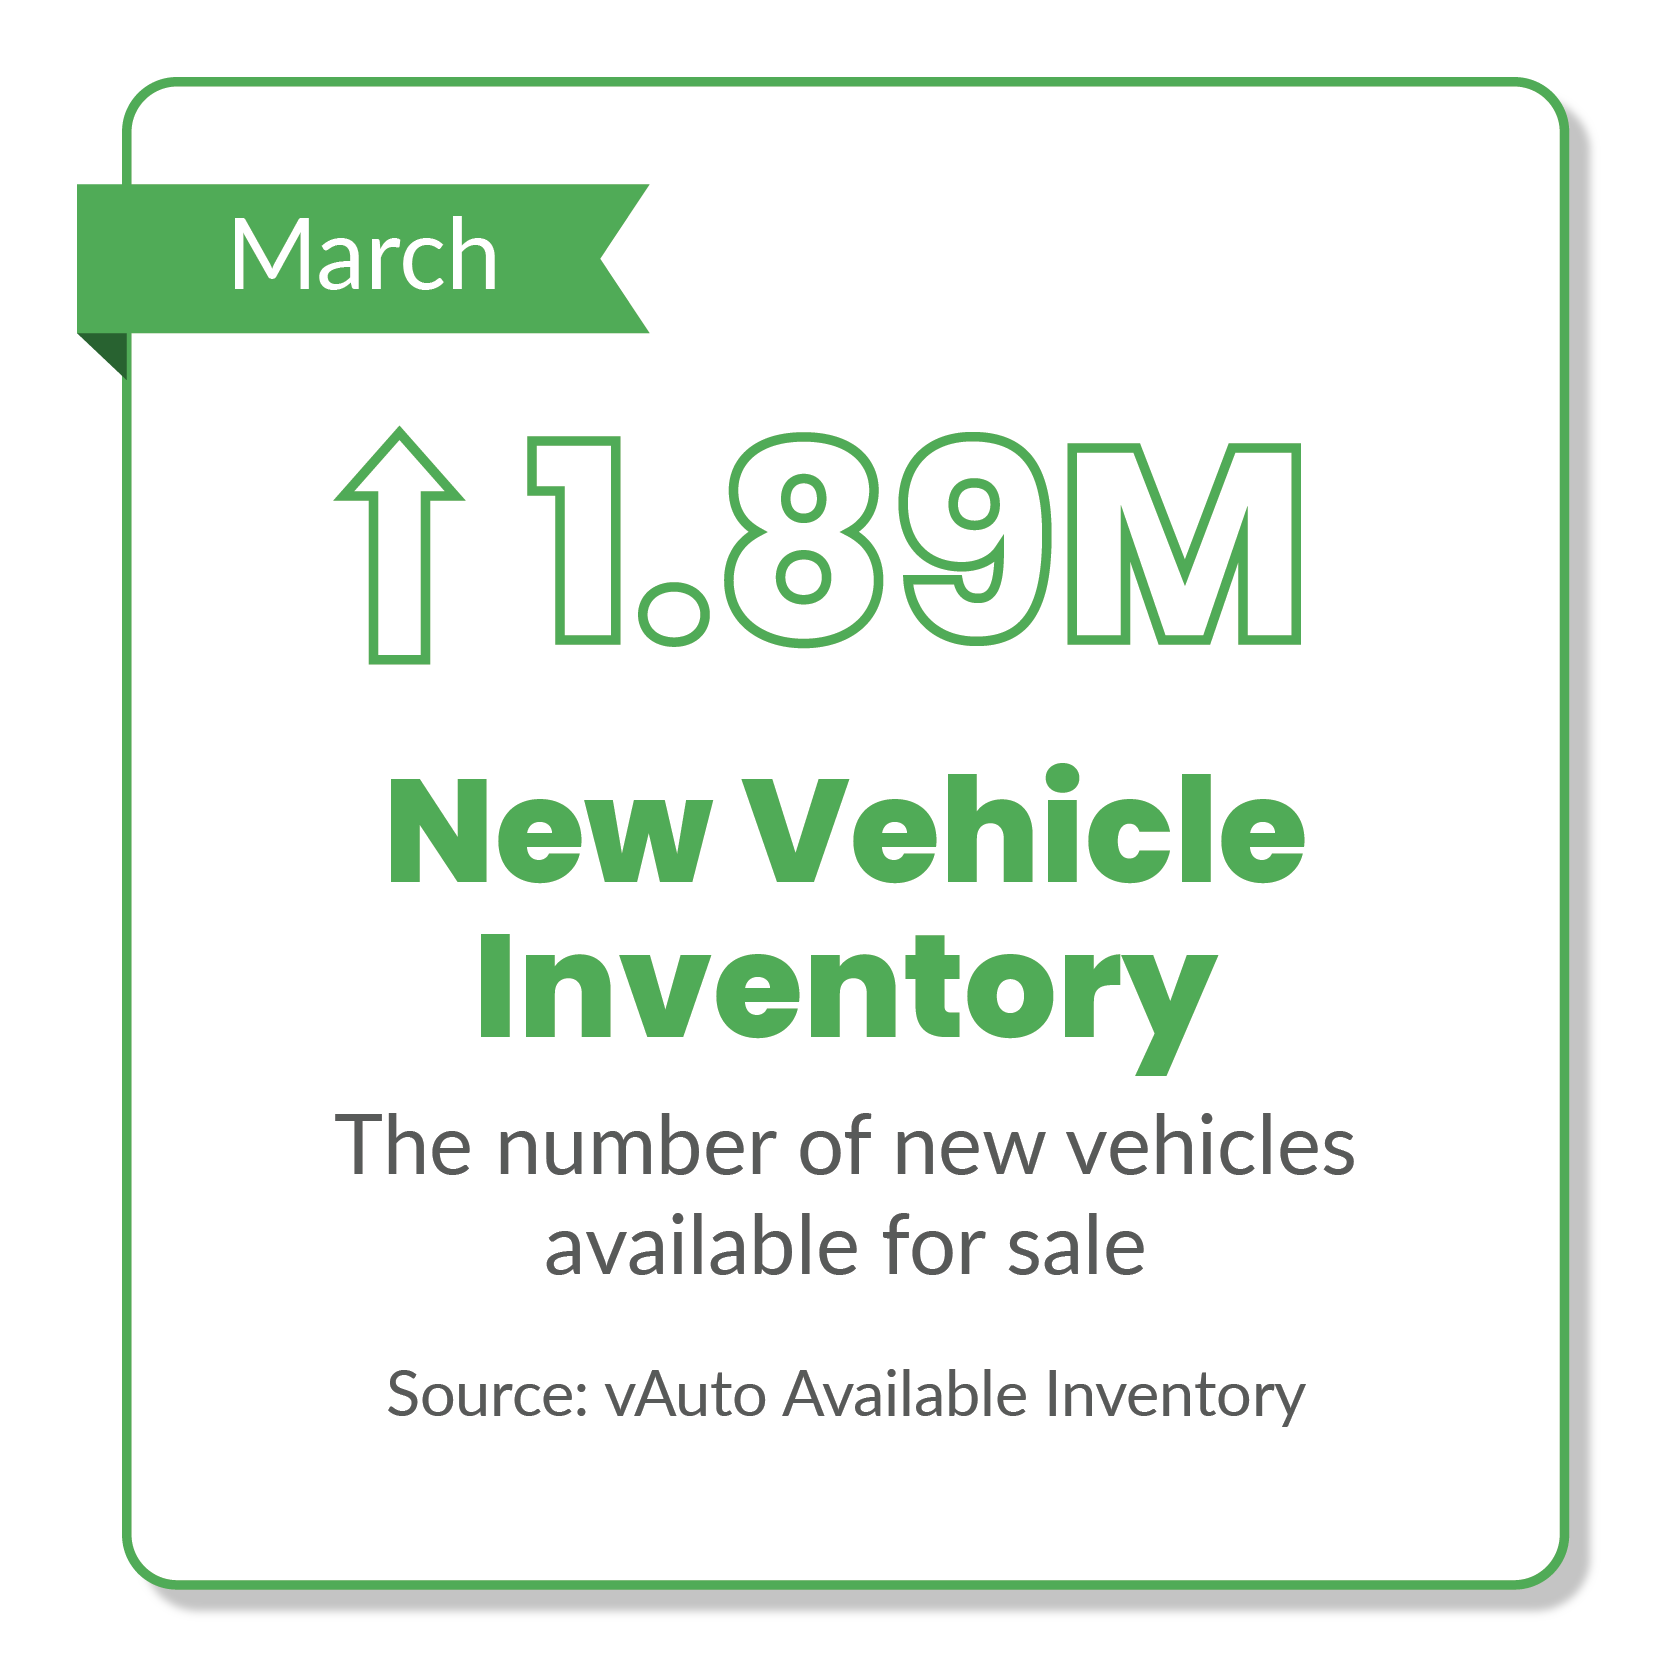 Ford Bronco Used Car Prices Steady, And Sales Soar In April ucme_marchgraphics-06-